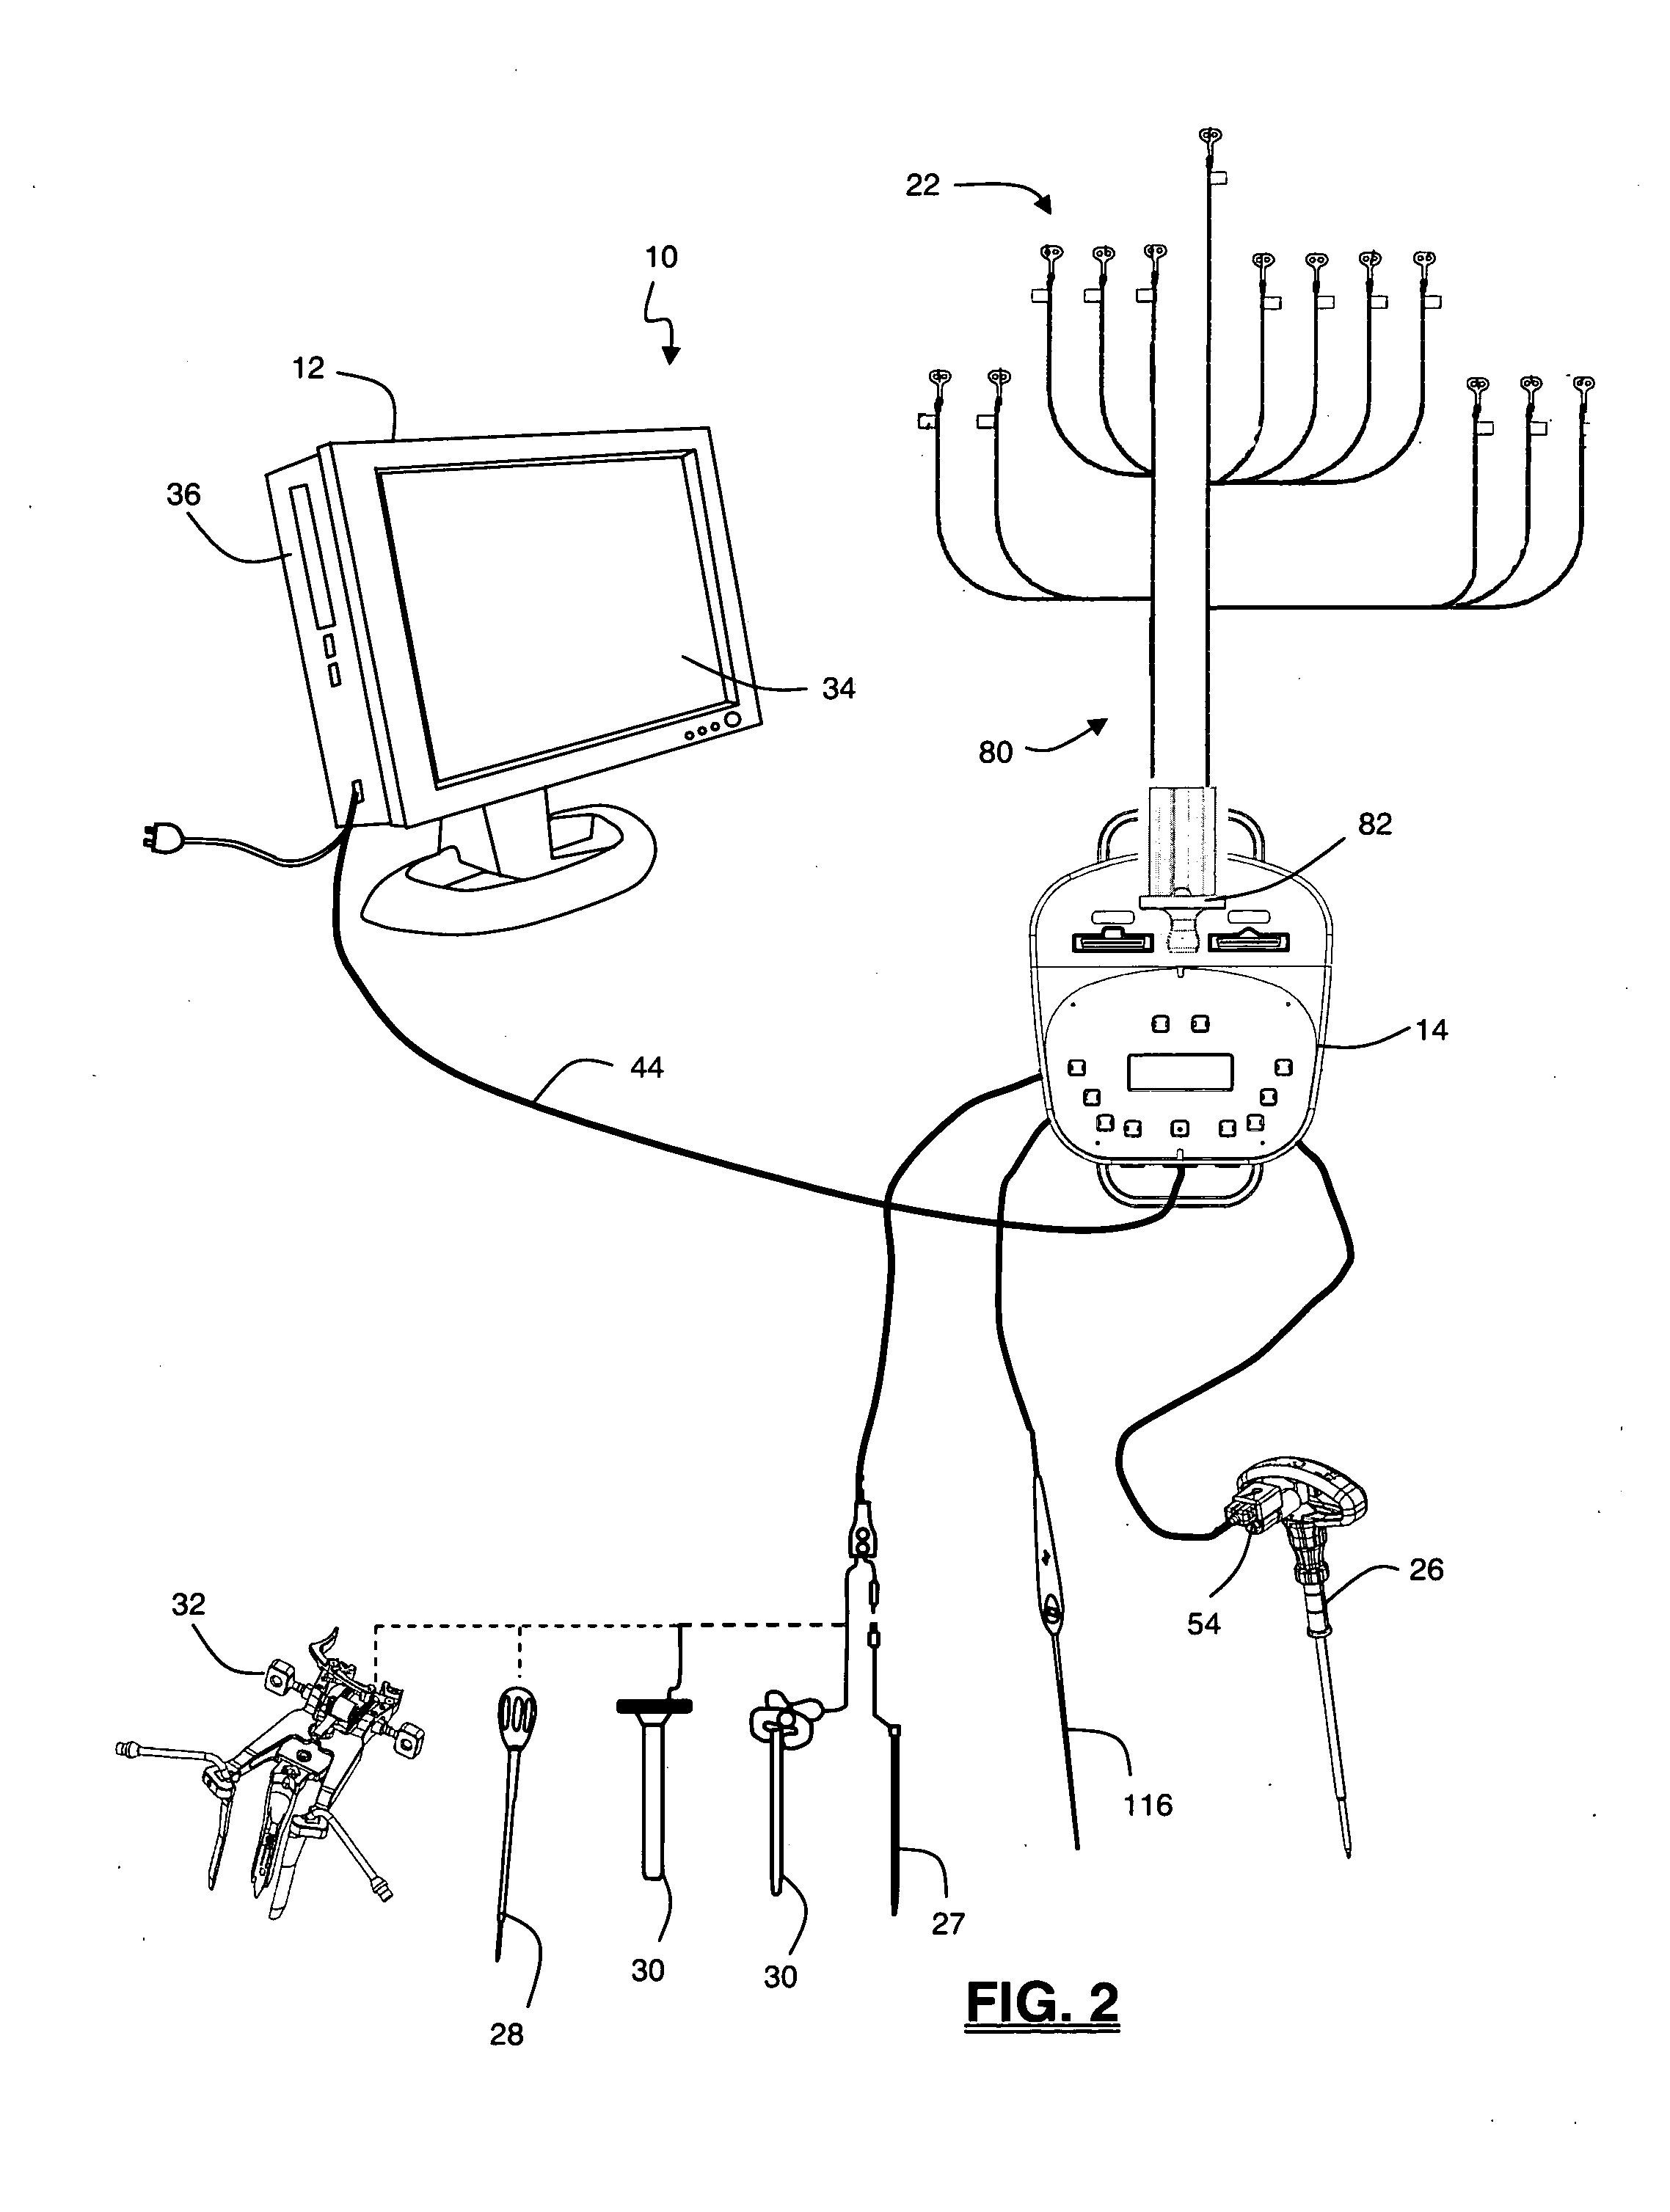 Neurophysiologic Monitoring System and Related Methods